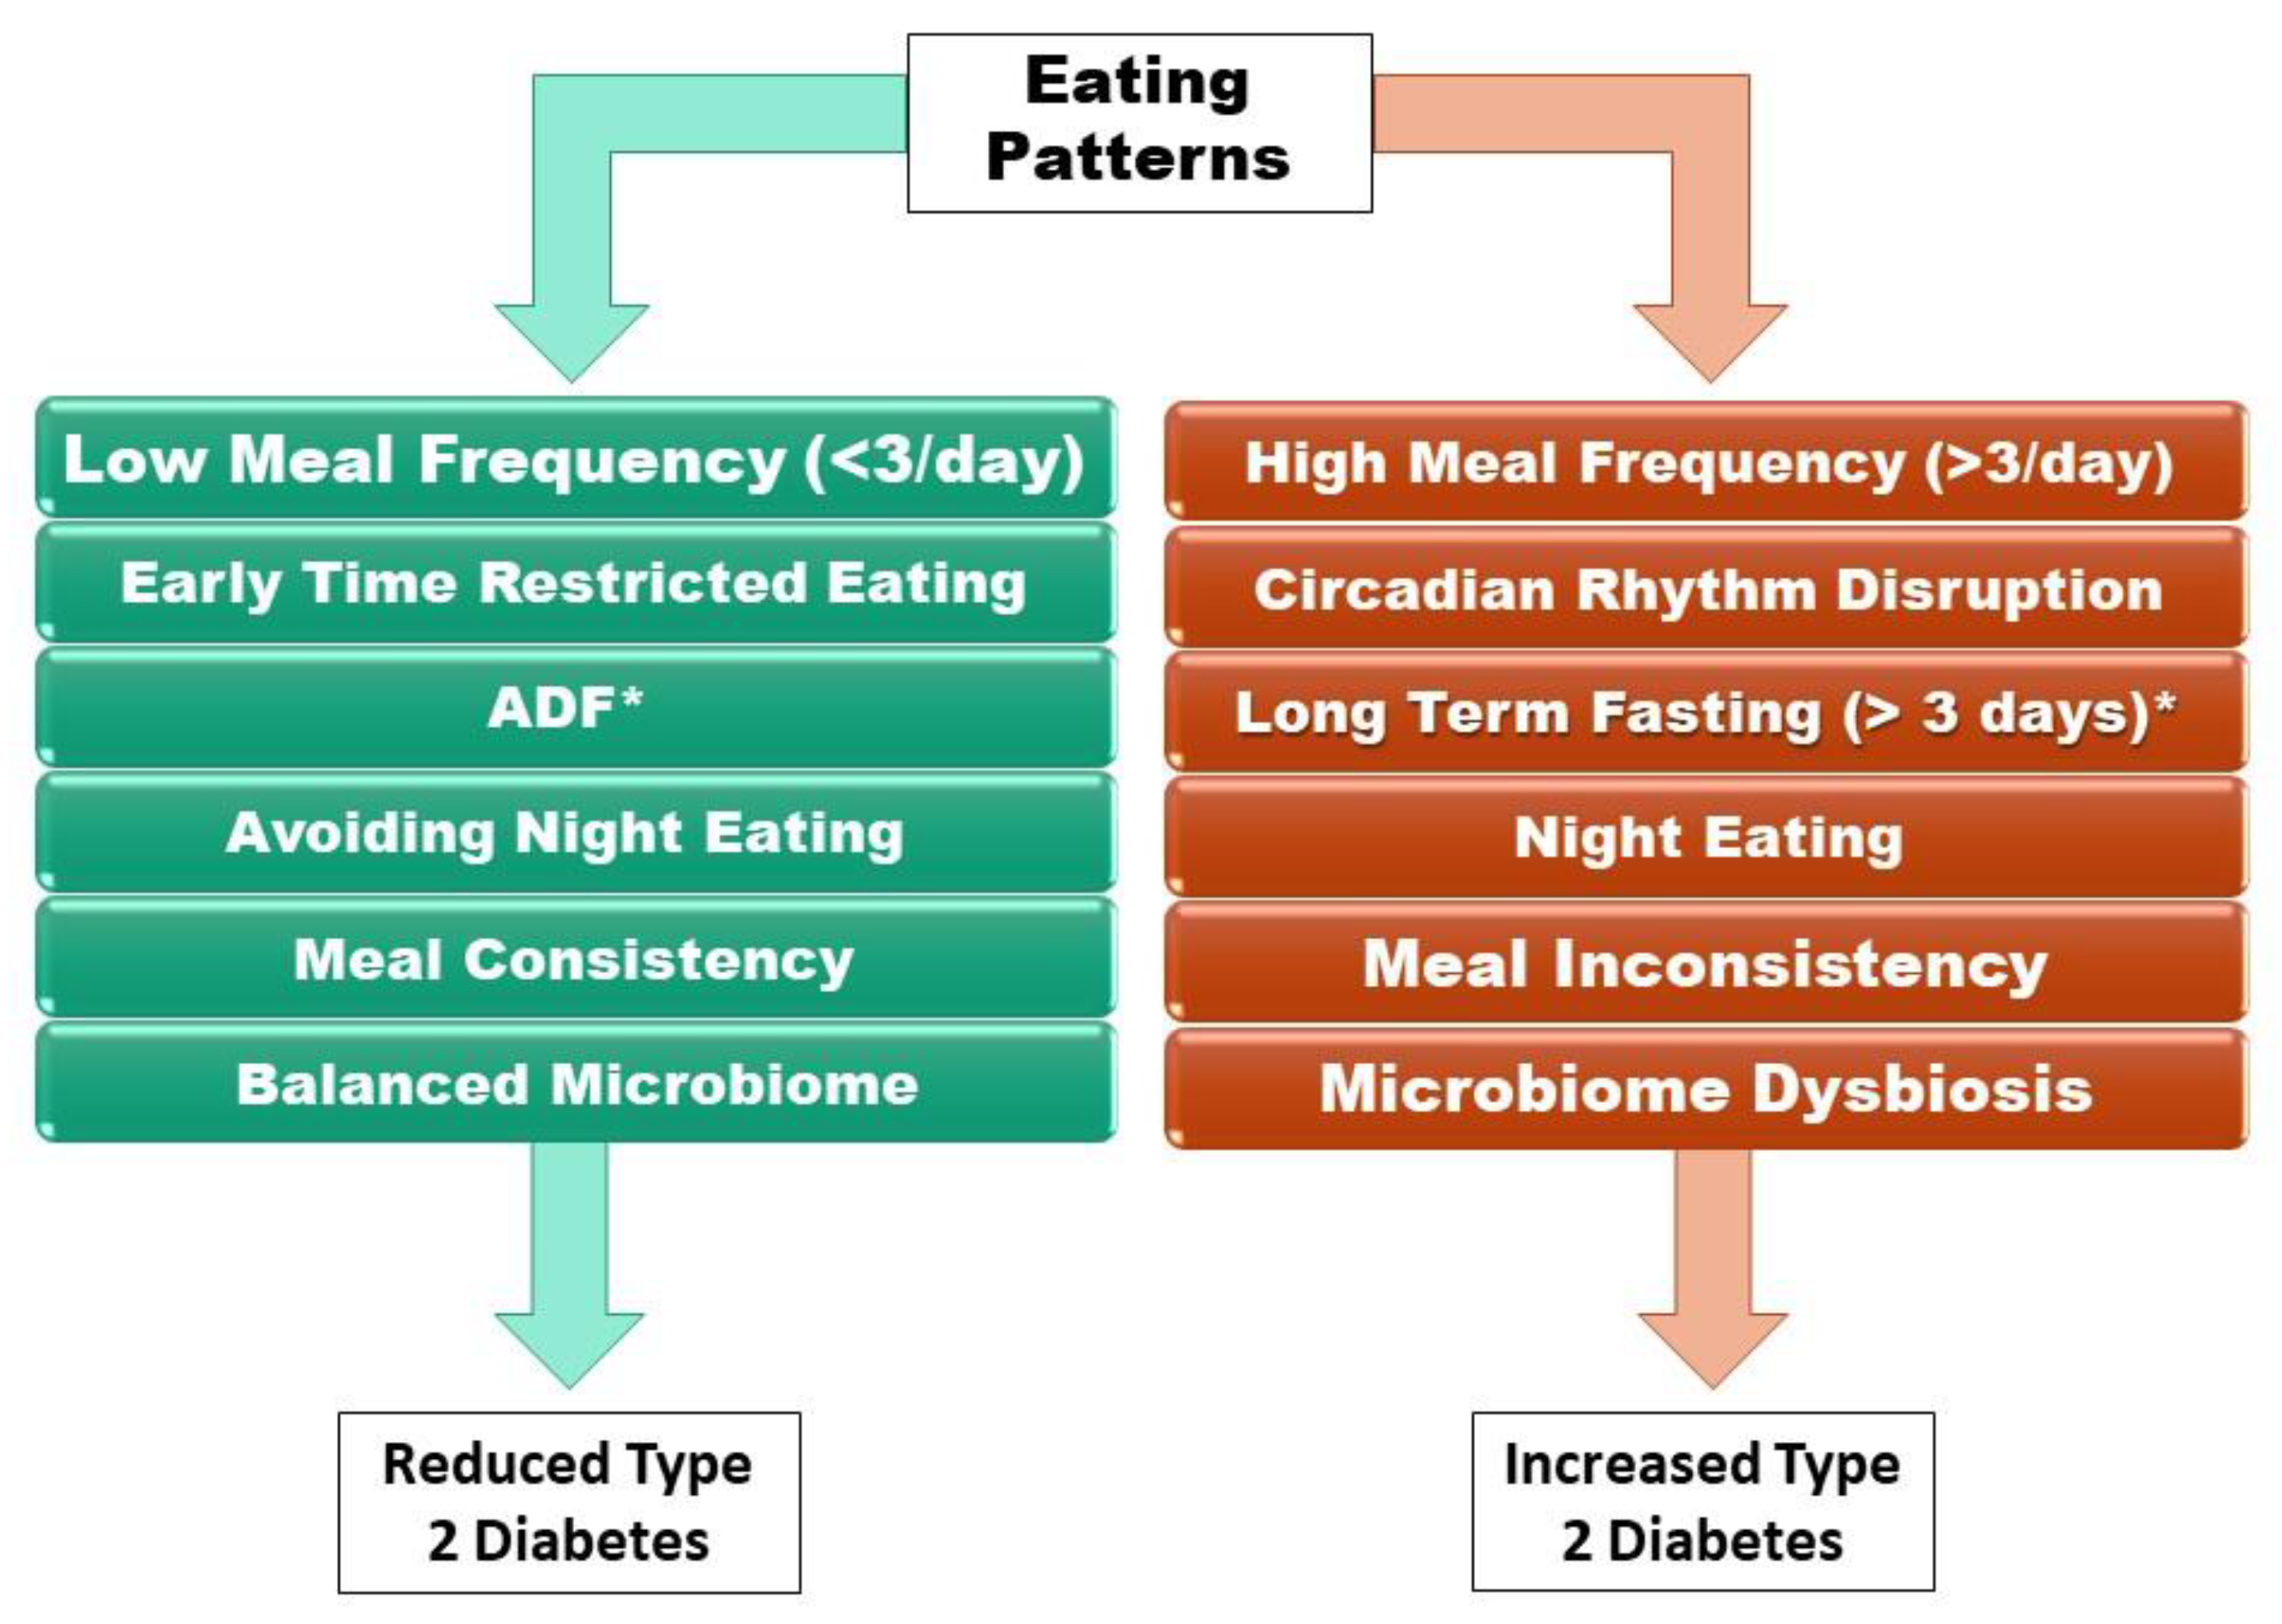 Time-restricted eating patterns